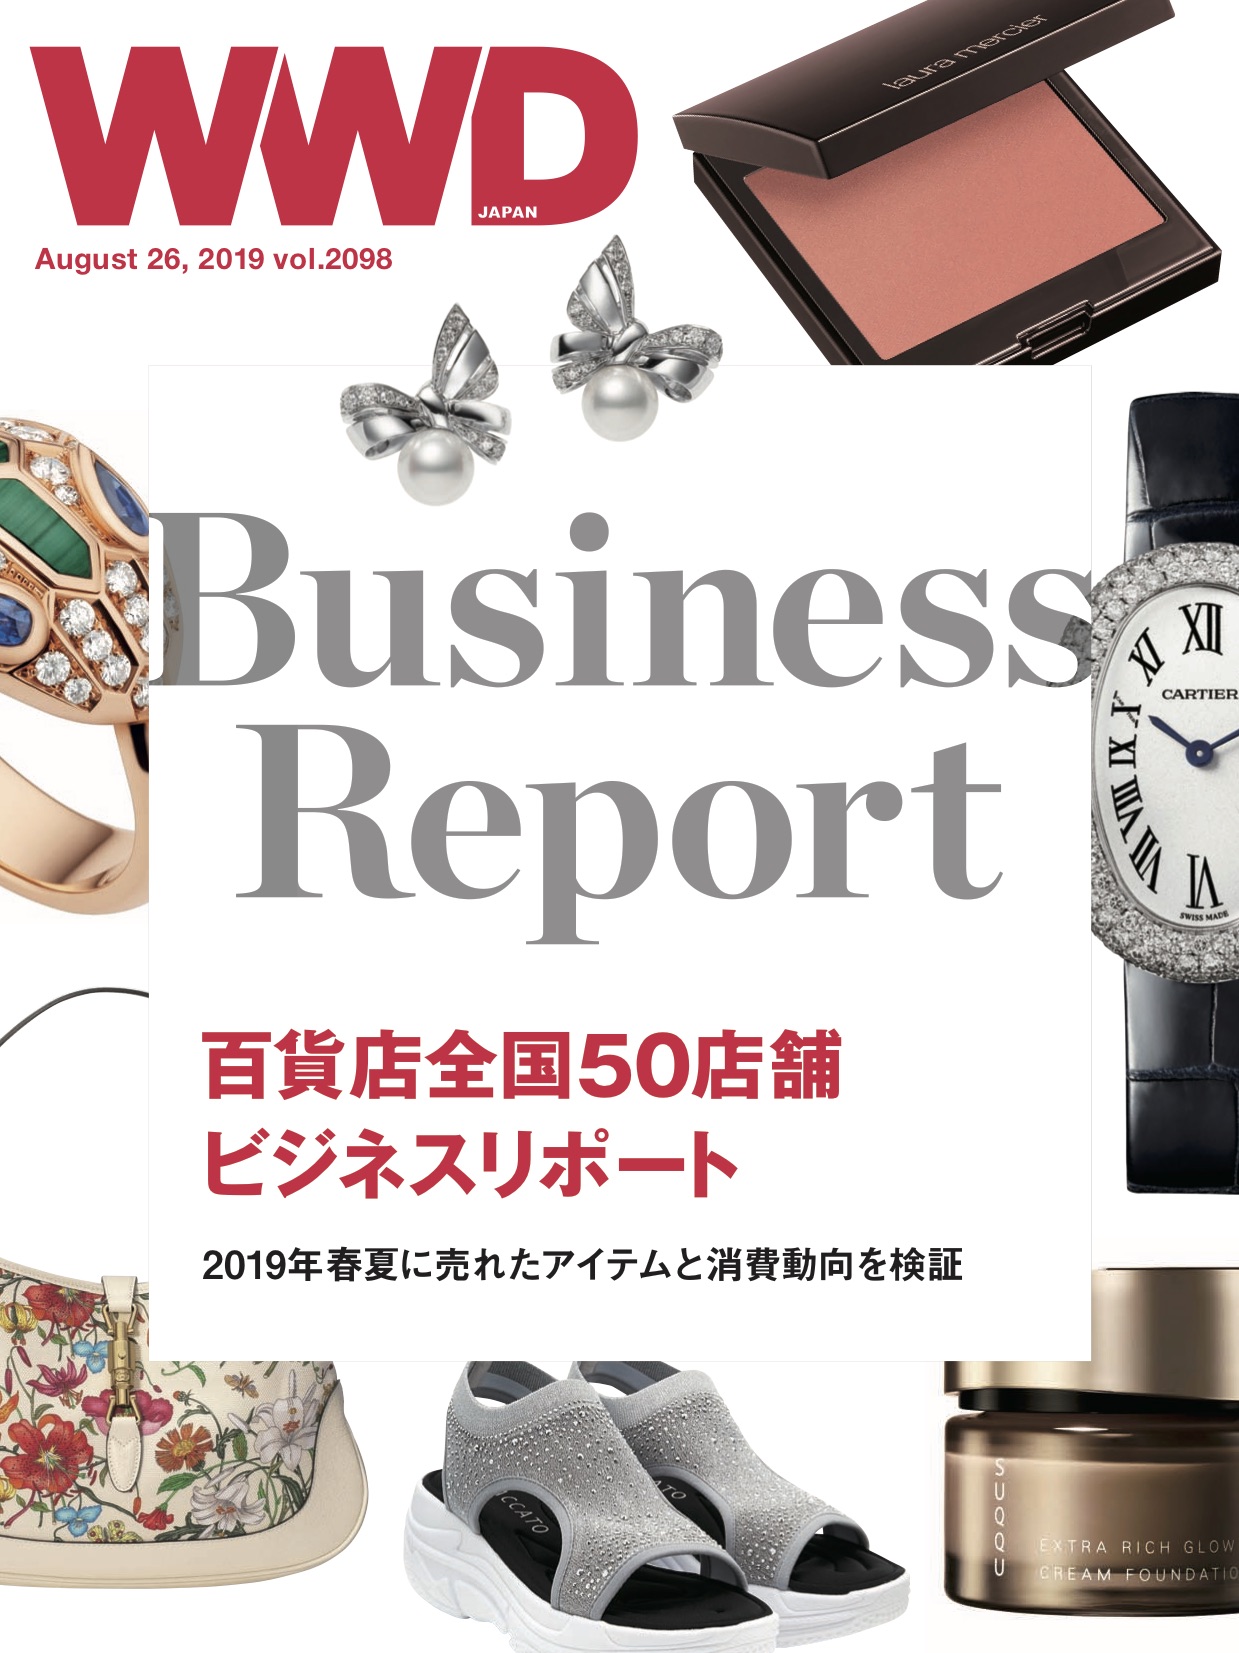 Business Report 百貨店全国50店舗 ビジネスリポート